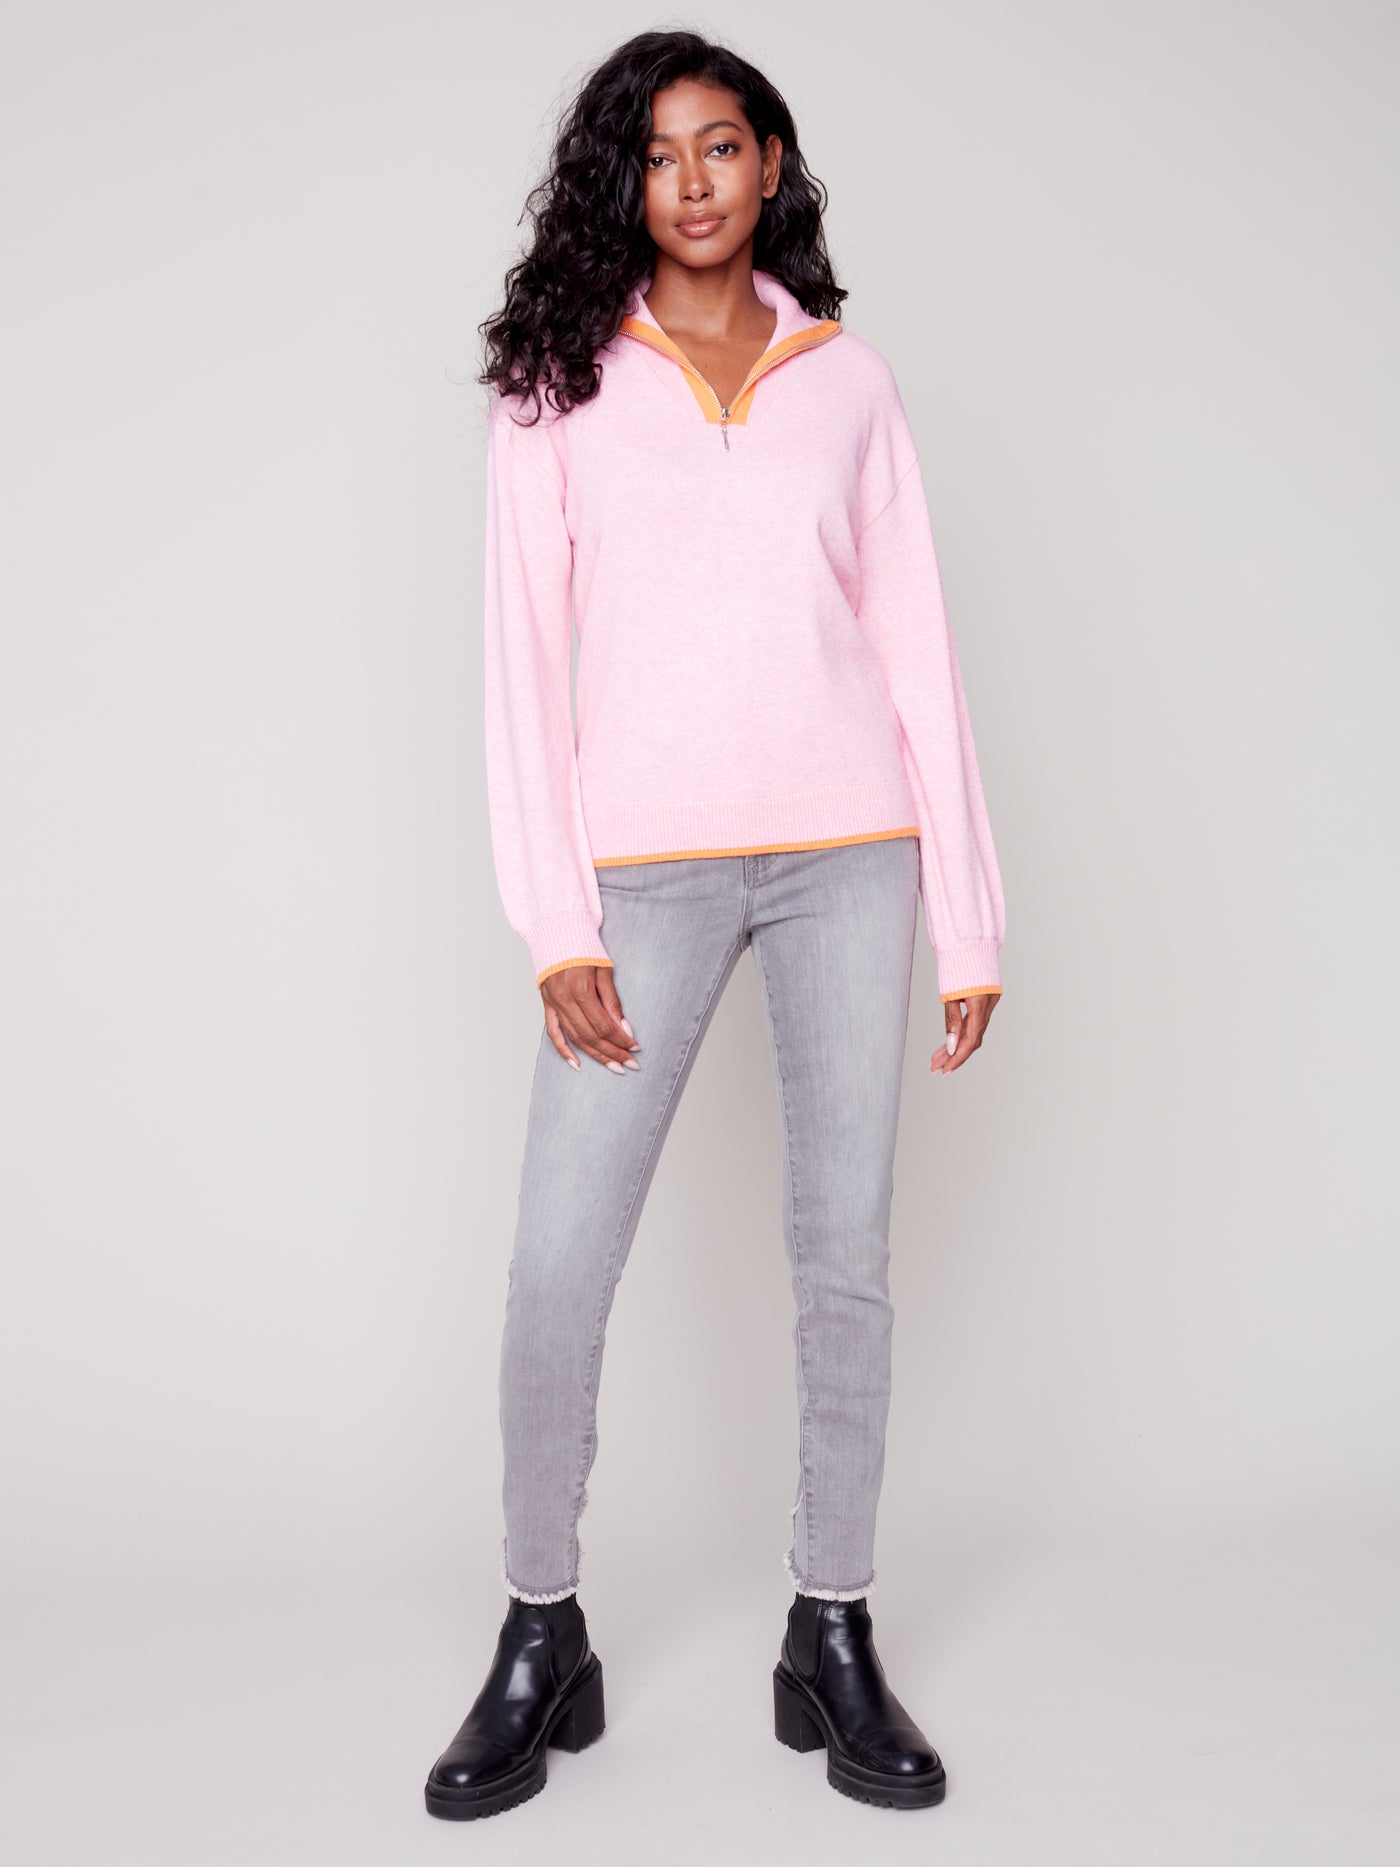 Charlie B Top - Quarter Zip Sweater - Pink Orchid